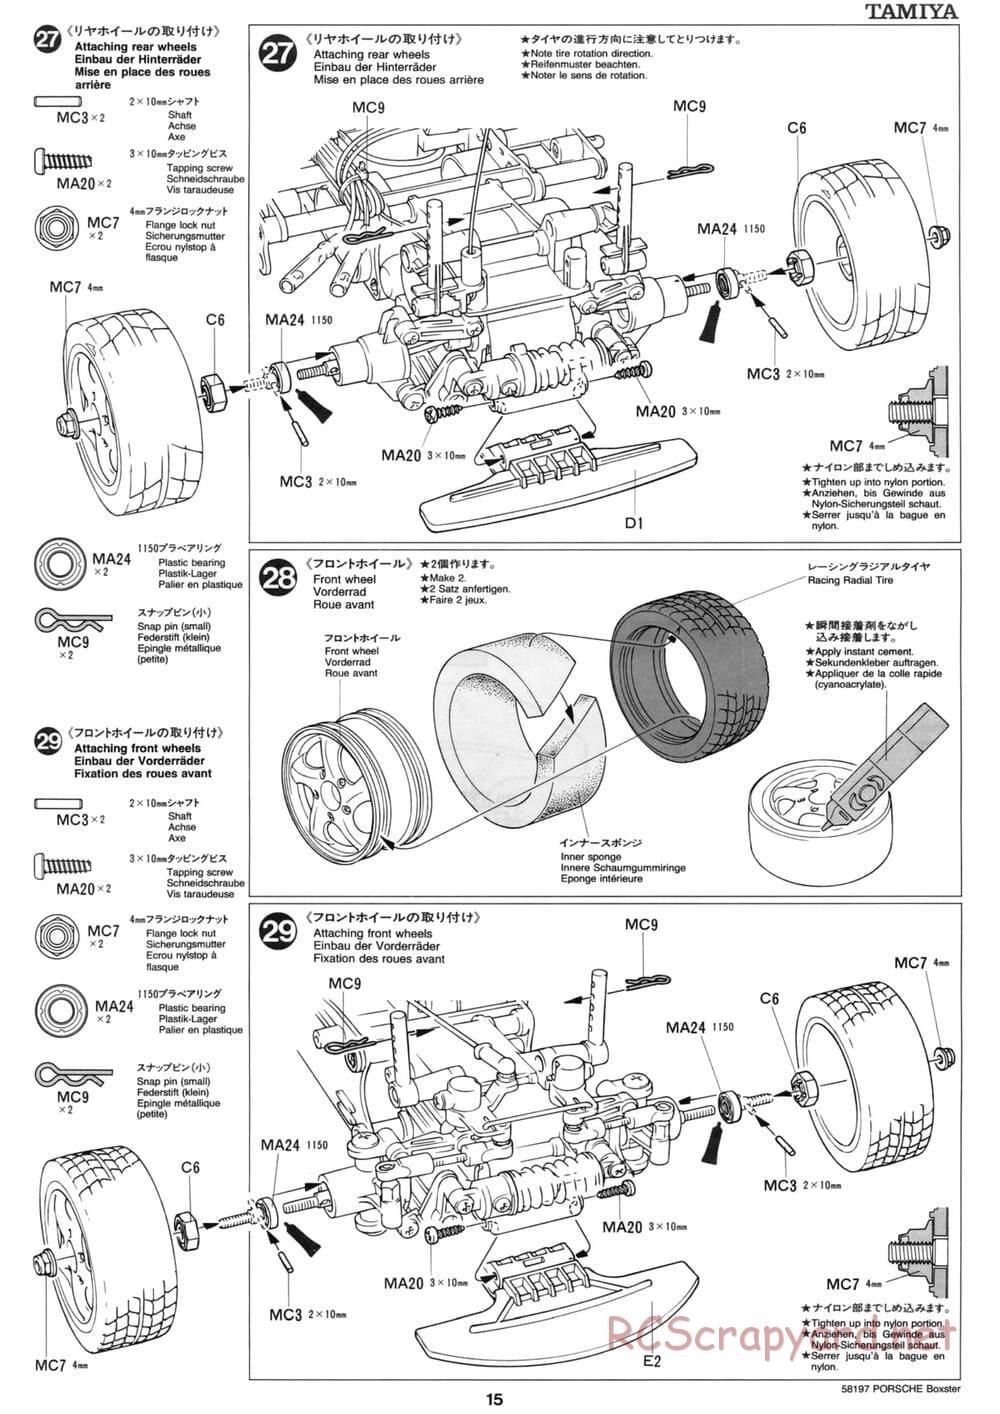 Tamiya - Porsche Boxster - M02L Chassis - Manual - Page 15